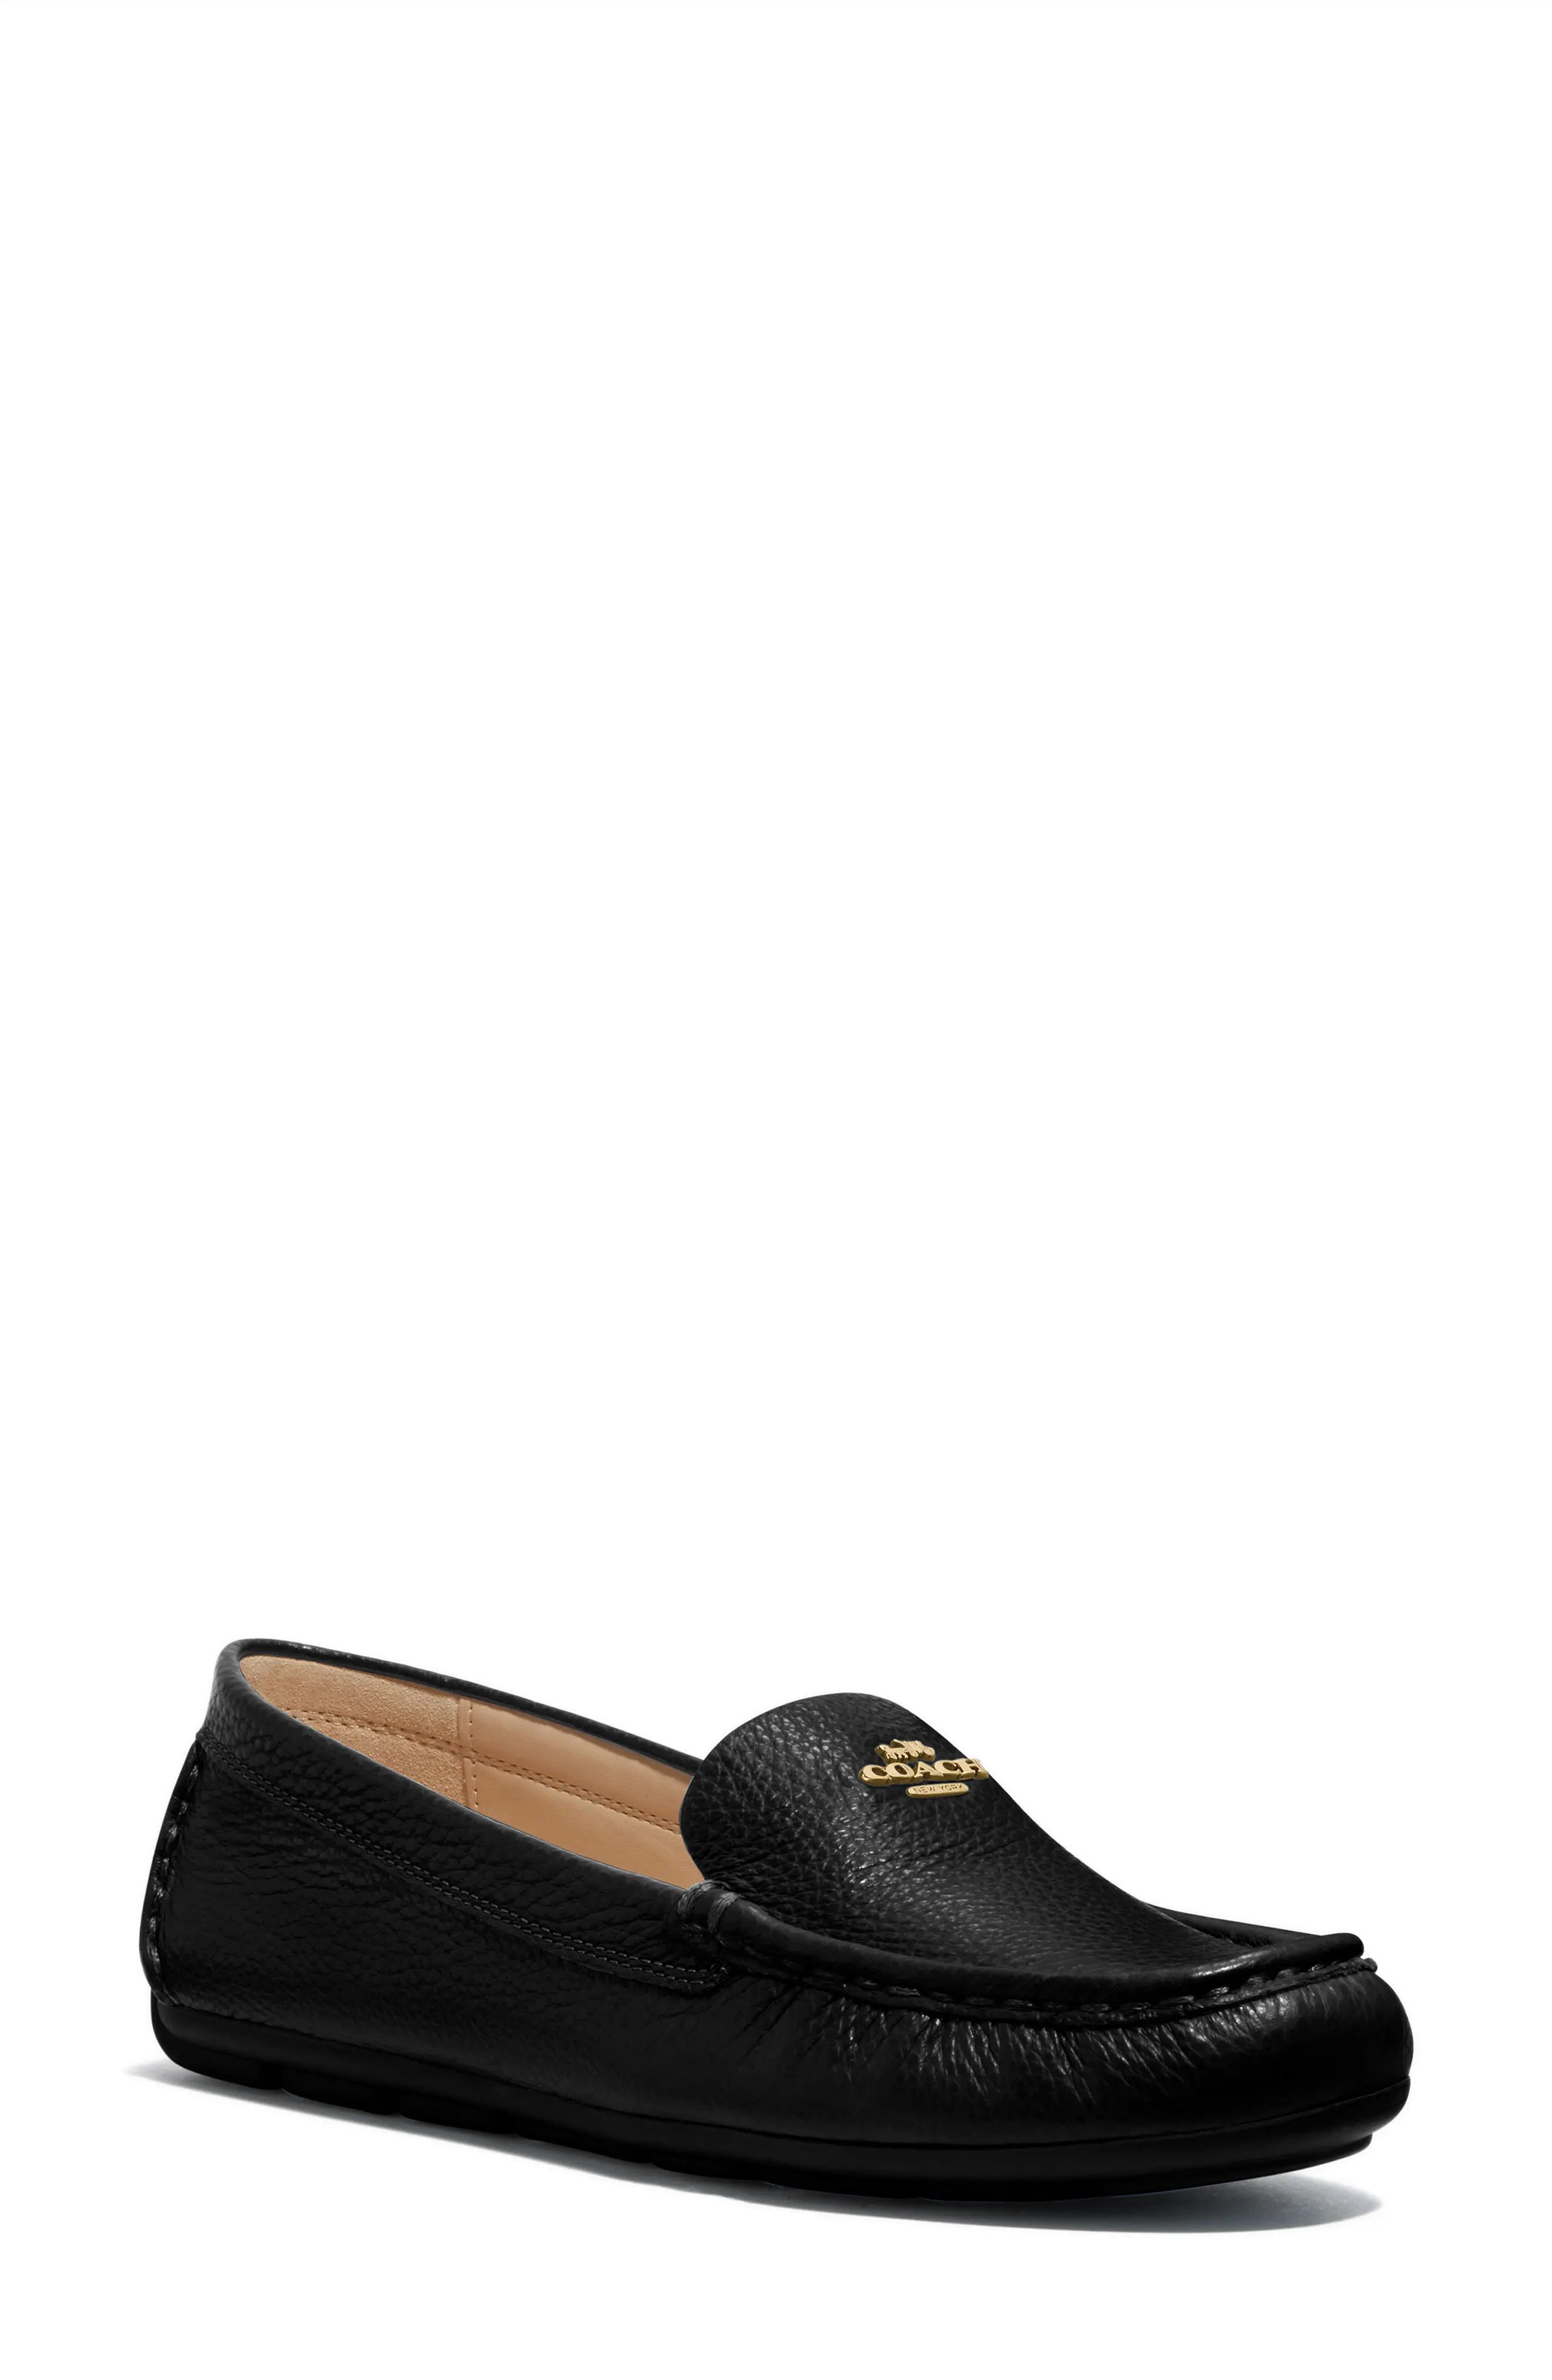 Women's Coach Marley Driving Moccasin, Size 7 B - Black | Nordstrom